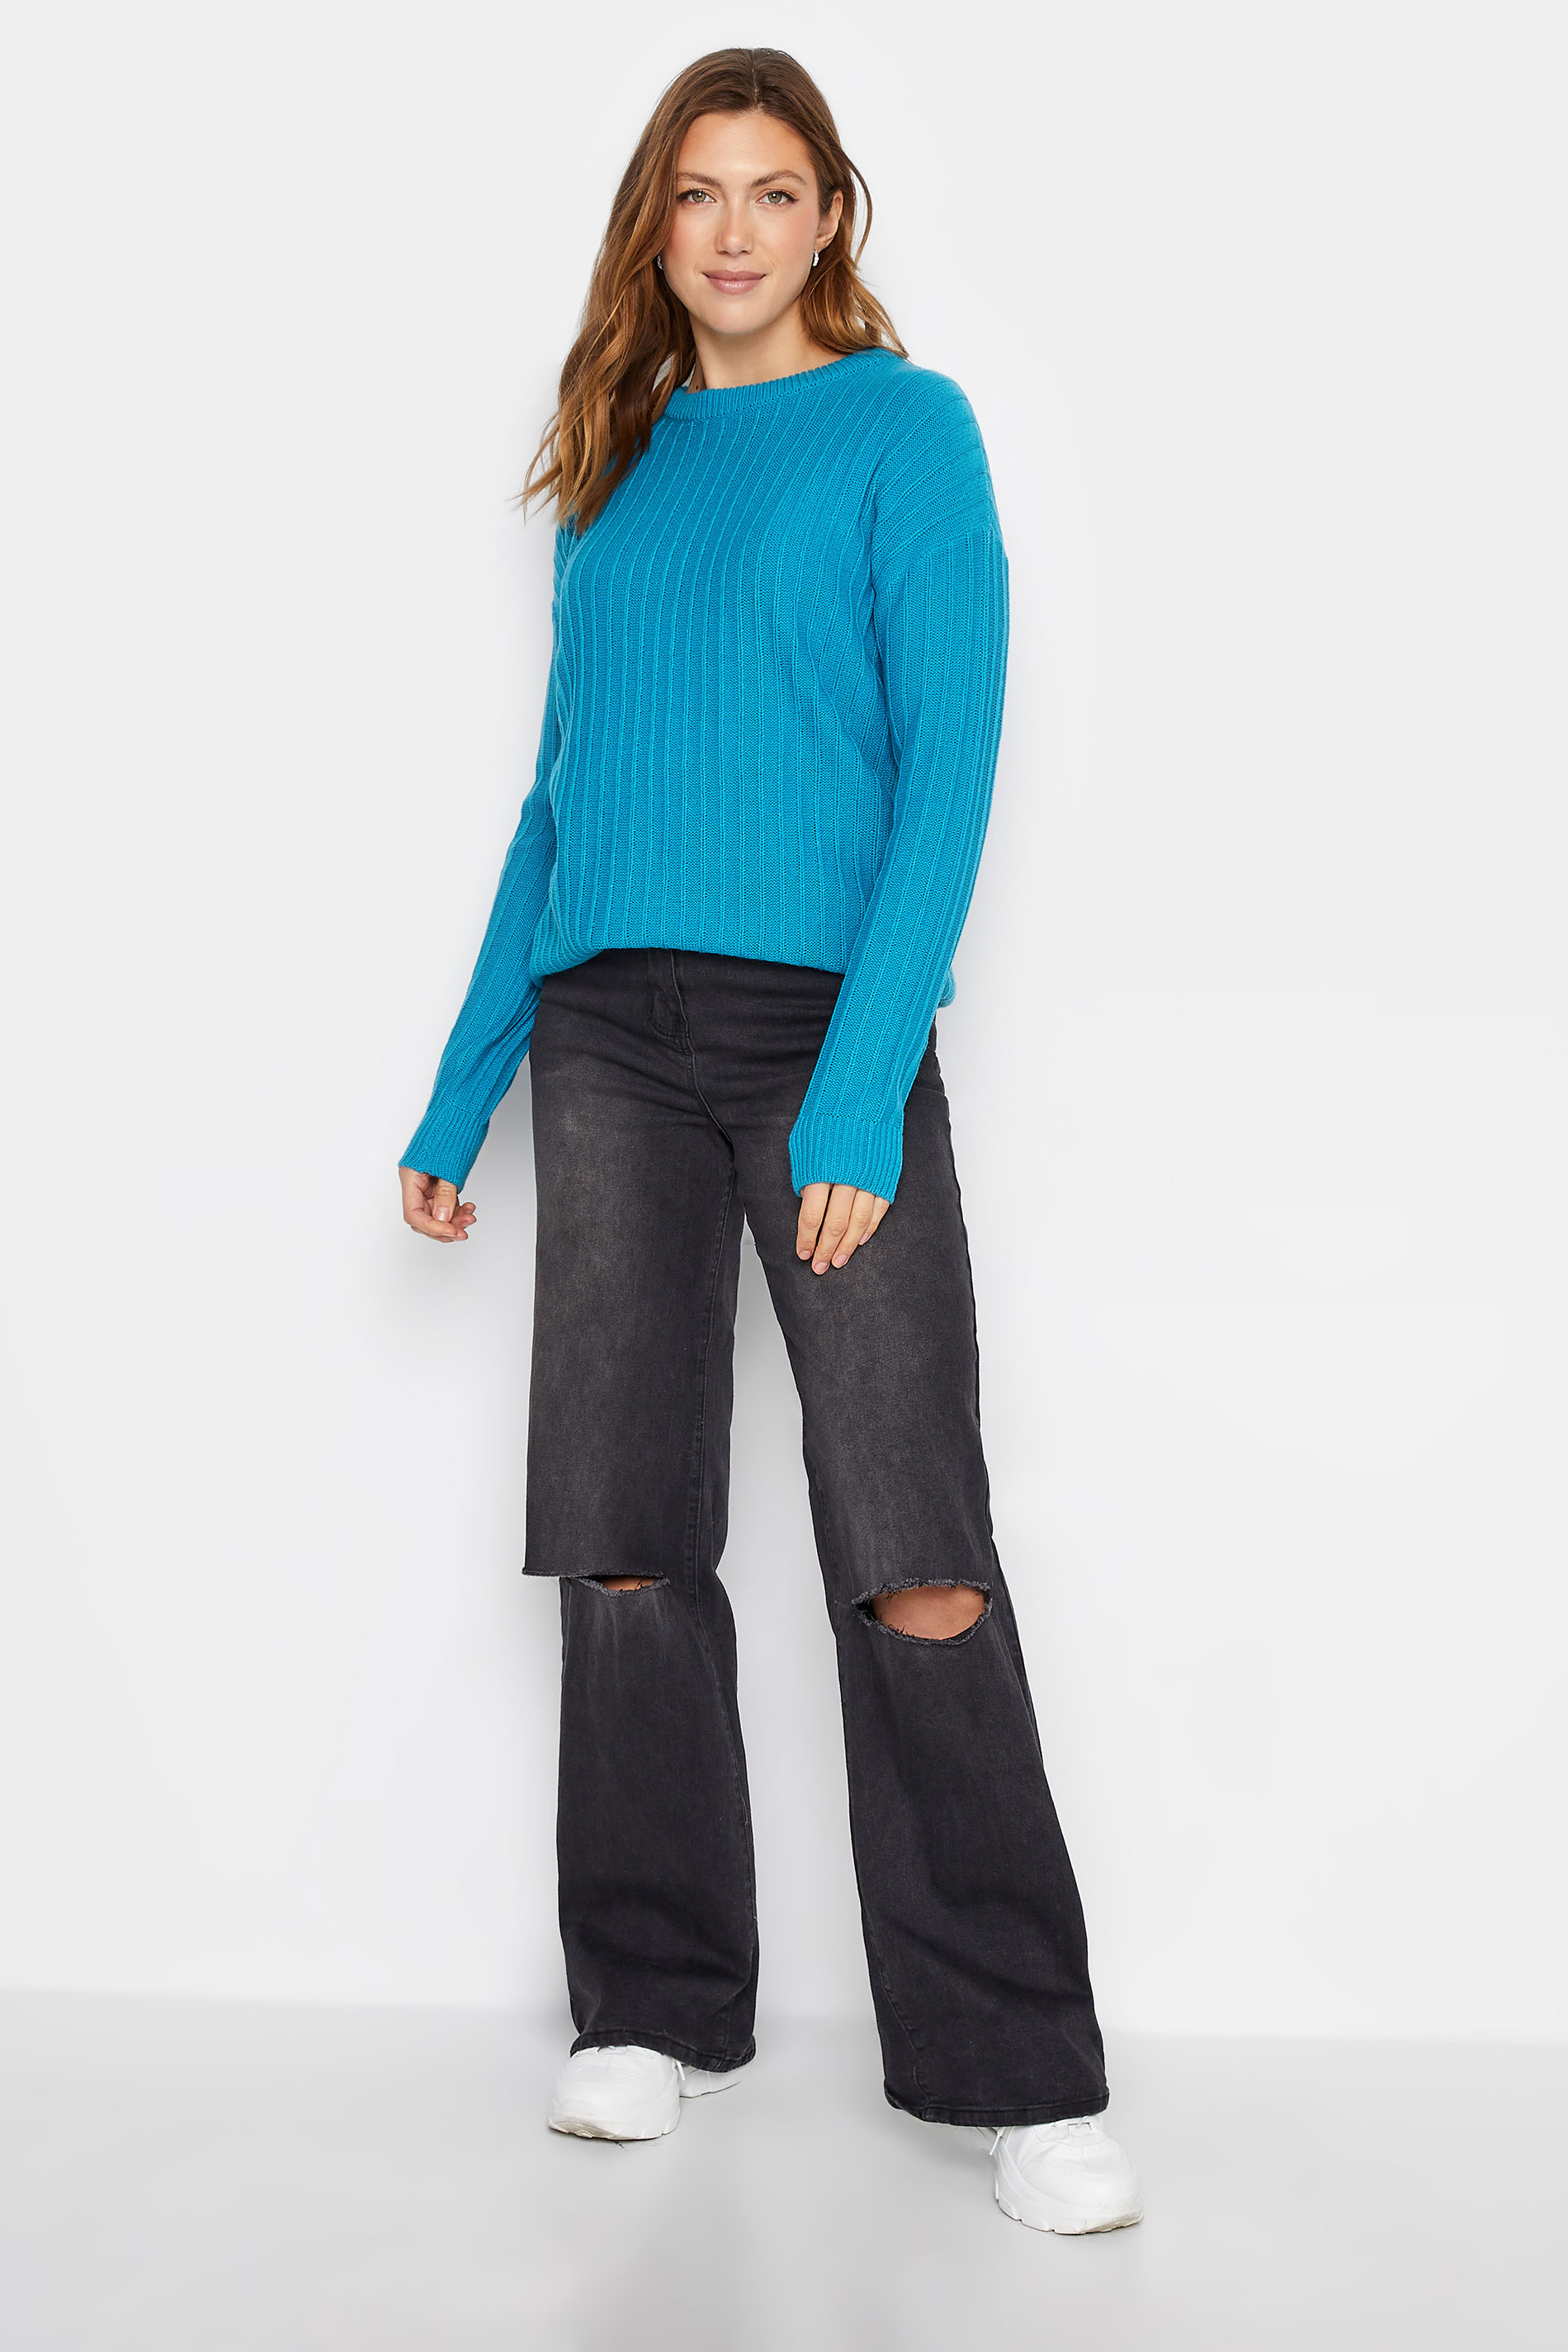 LTS Tall Women's Turquoise Blue Ribbed Long Sleeve Knit Jumper | Long Tall Sally 2